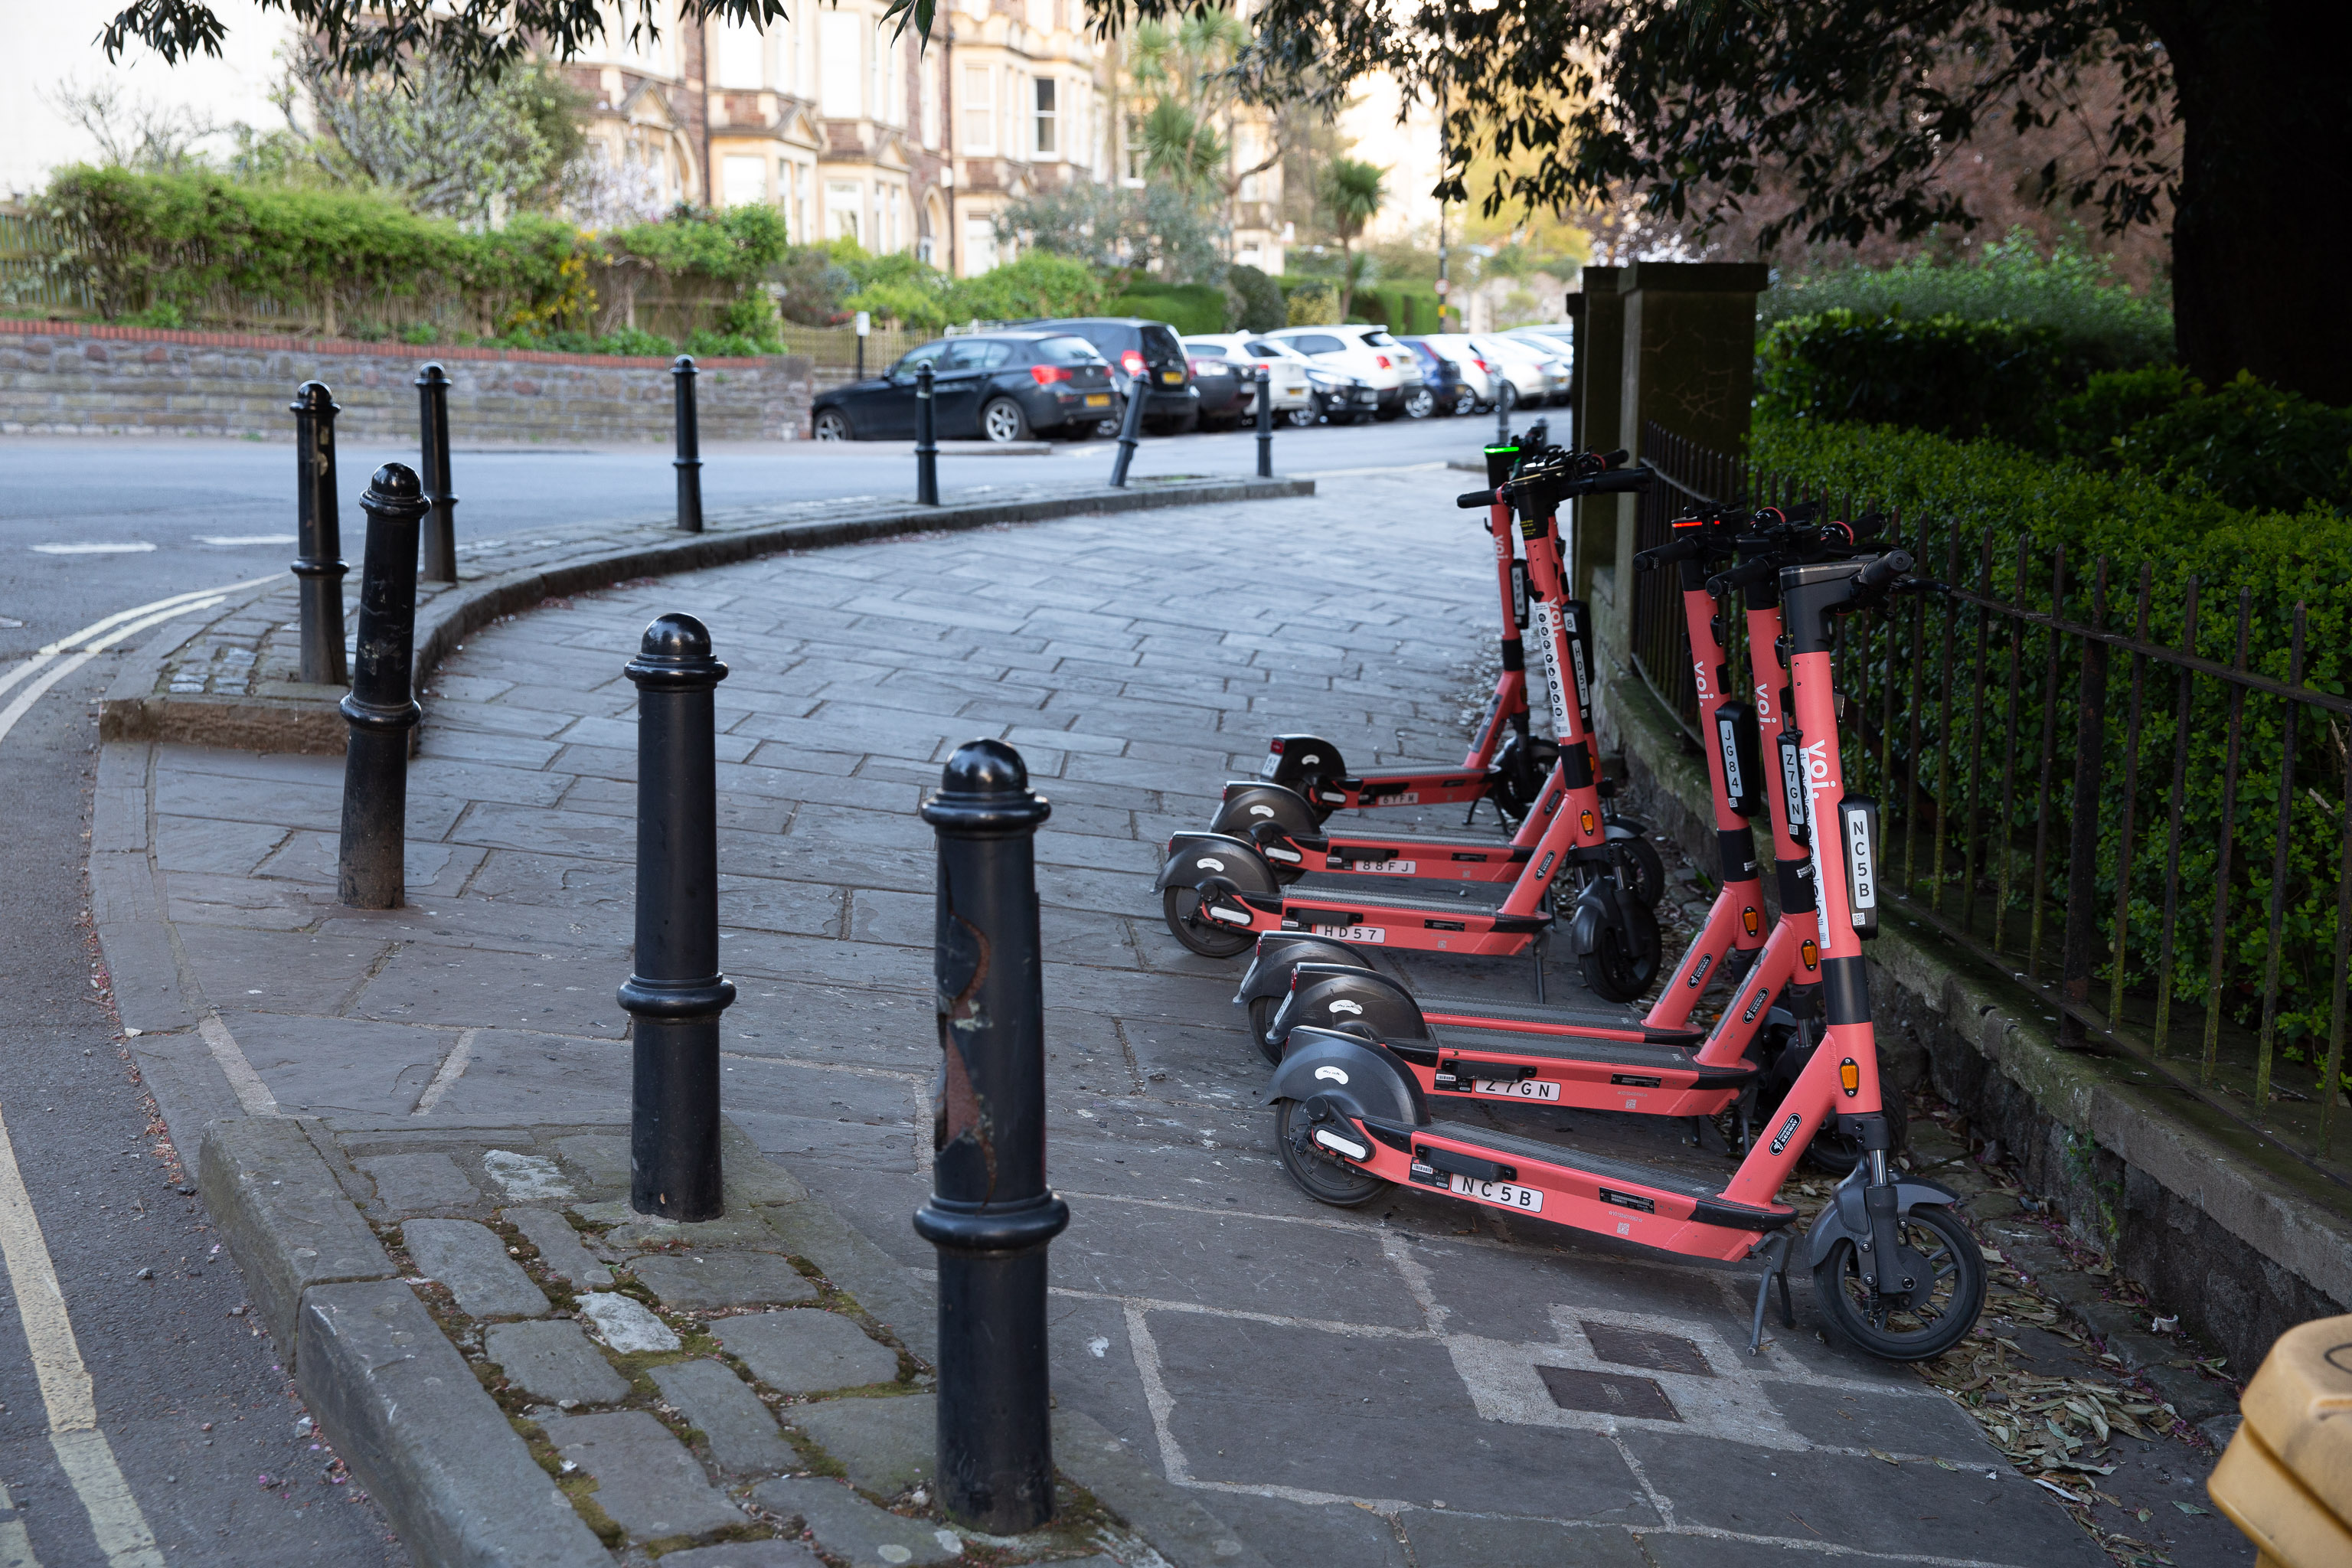 Voi
They've been trying to find a balance between allowing the scooters to park in as many places as they can, for a more useful rental service, with n...